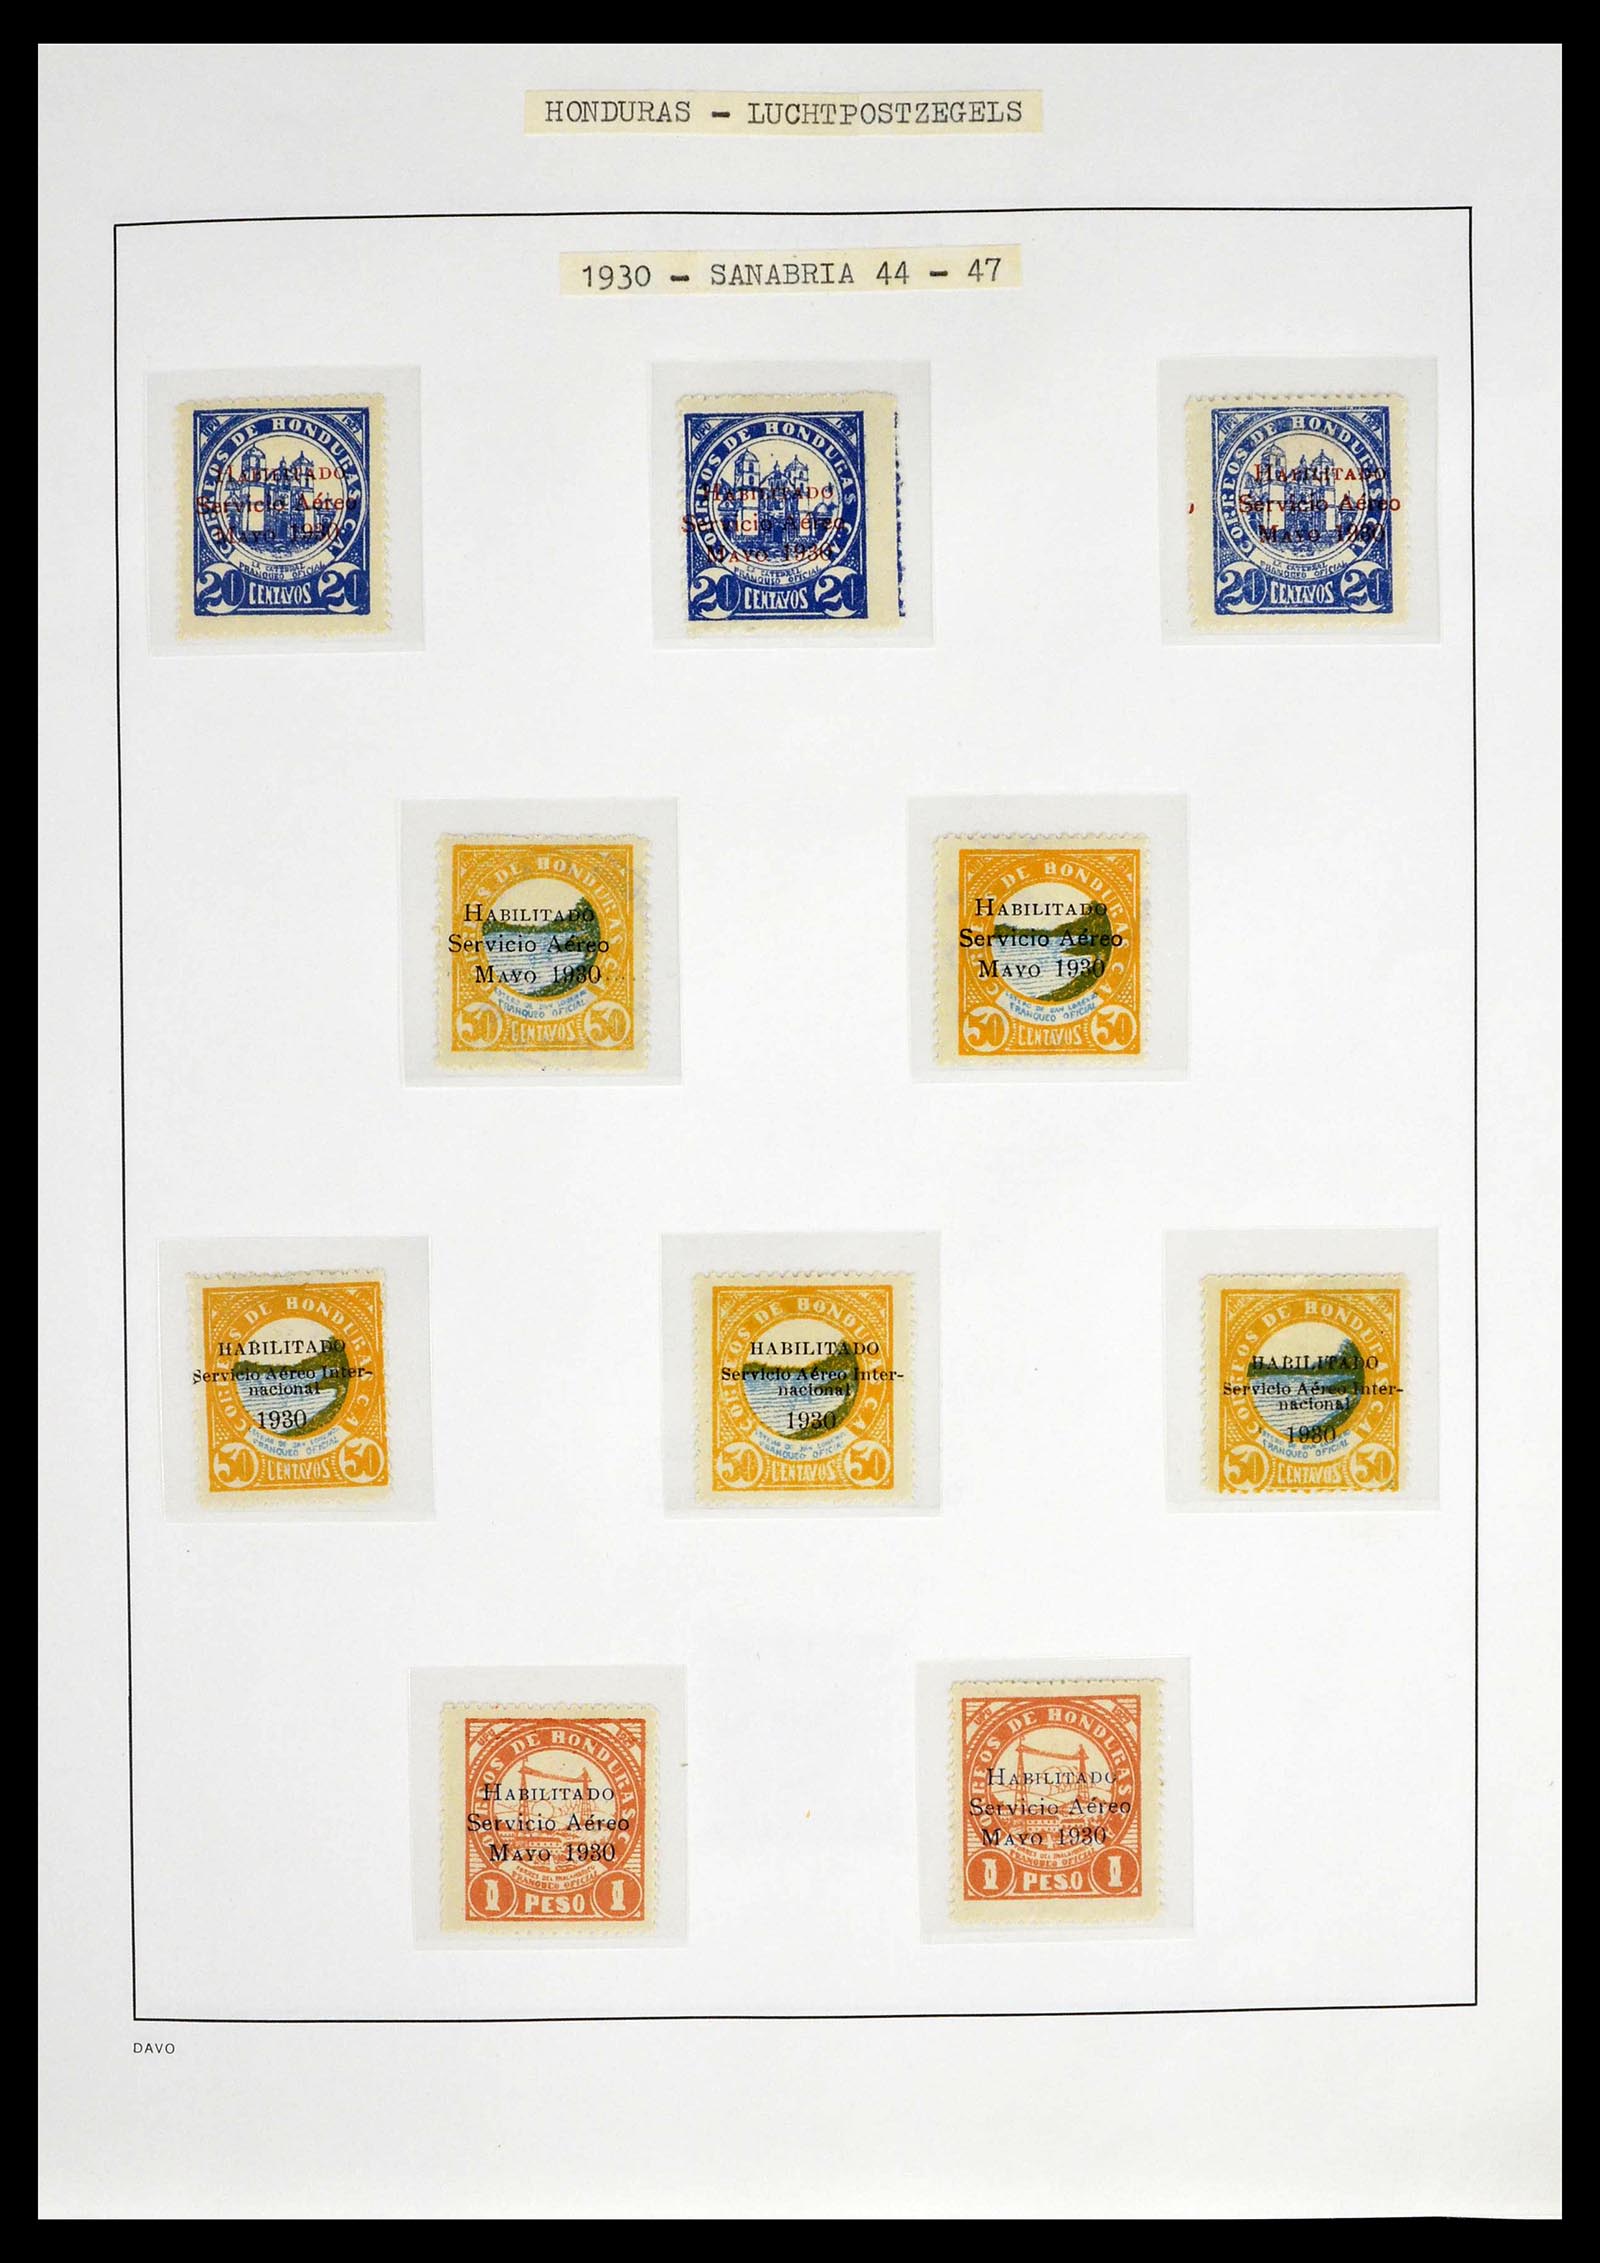 39410 0058 - Stamp collection 39410 Honduras topcollection airmail 1925-1984.